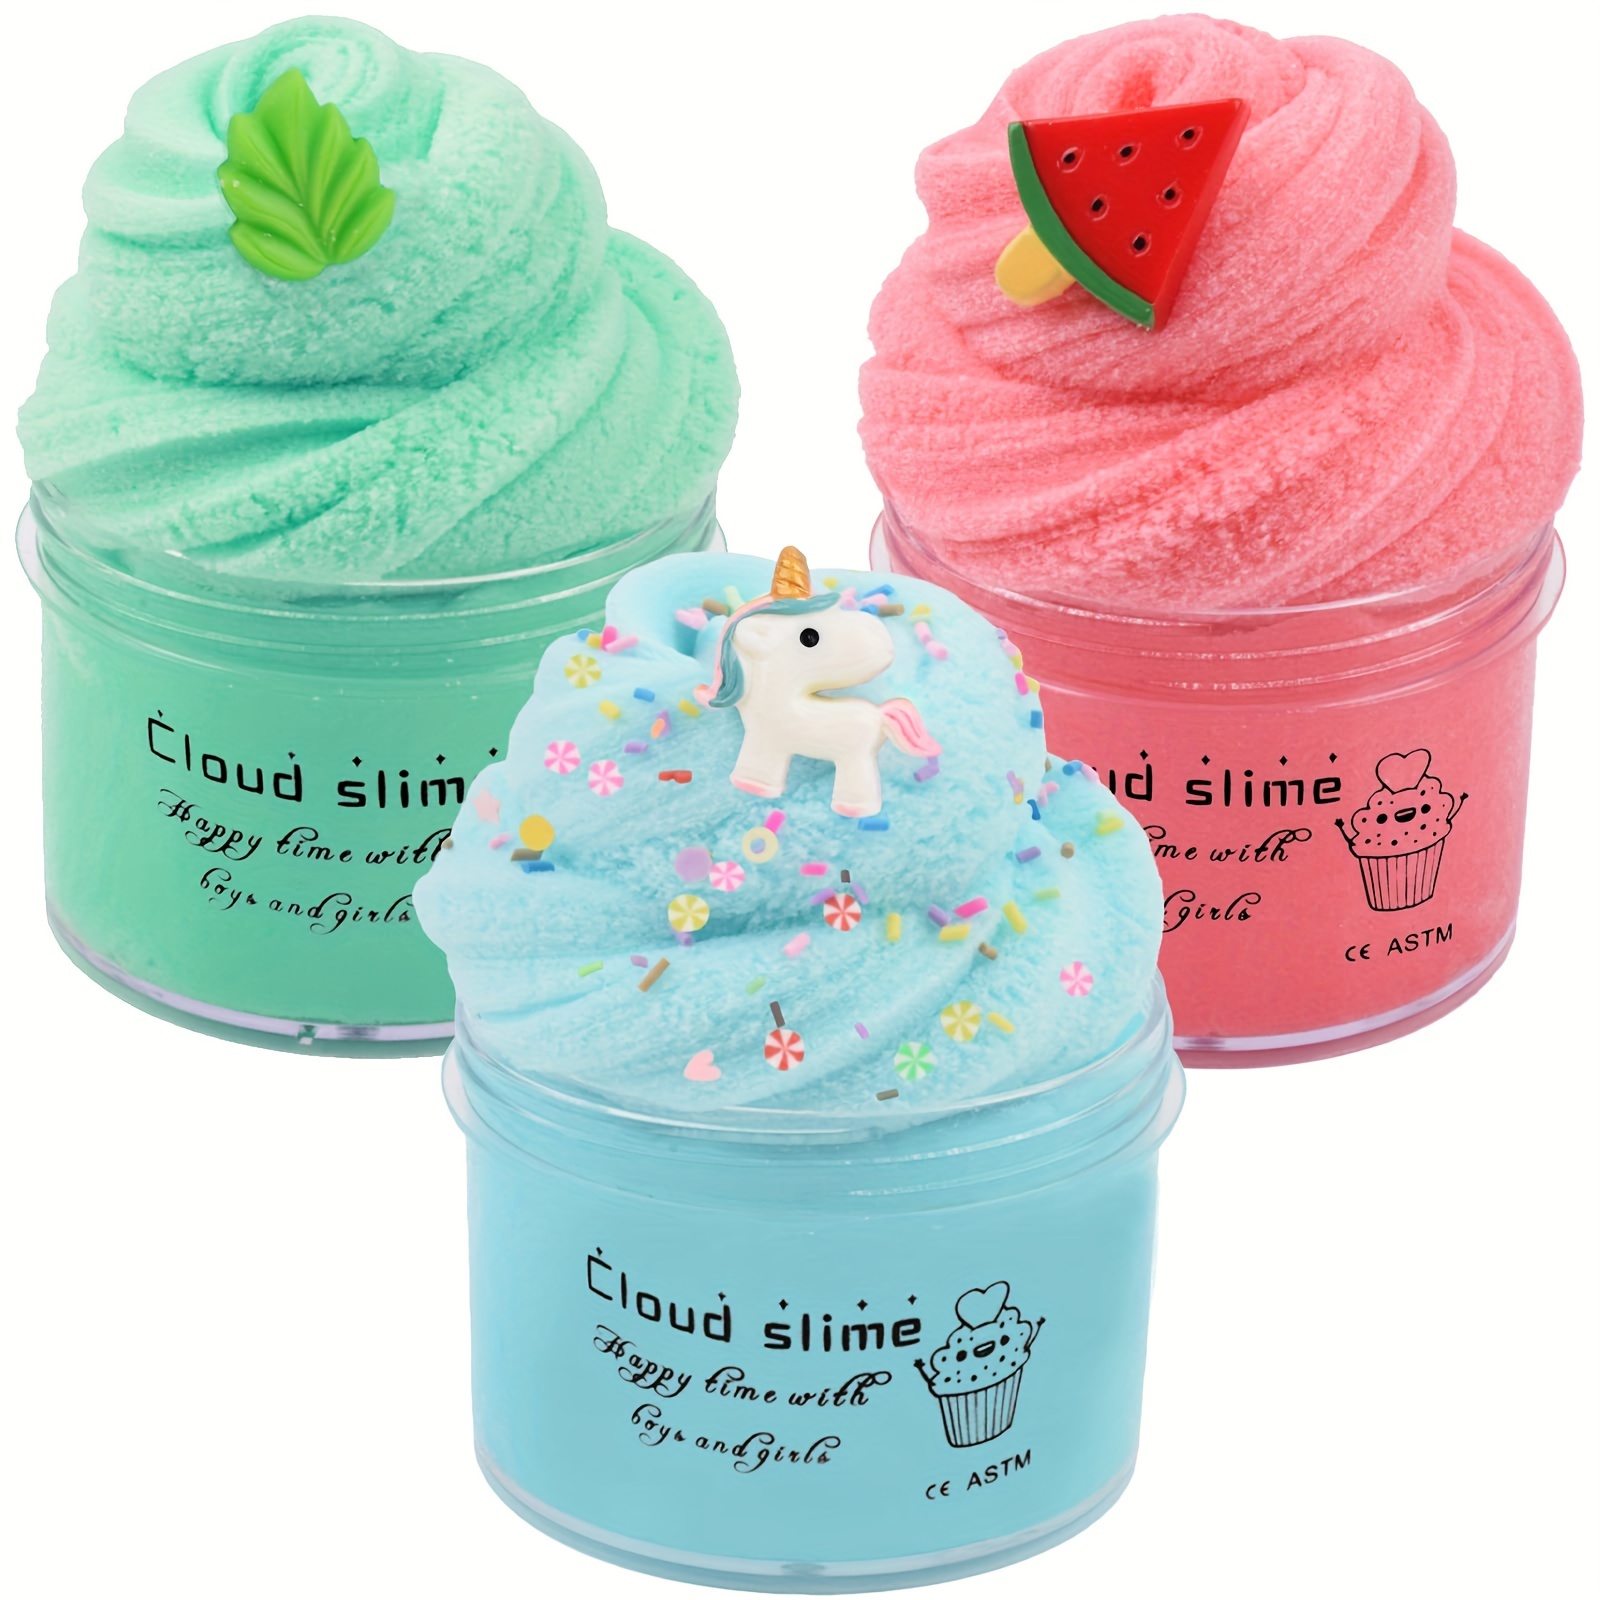 4 PCS Cloud Slime Kit,Scented DIY Mini Slime Supplies for Kids, Best  Birthday Gift Stress Relief Toy for Boys and Girls Party Favor